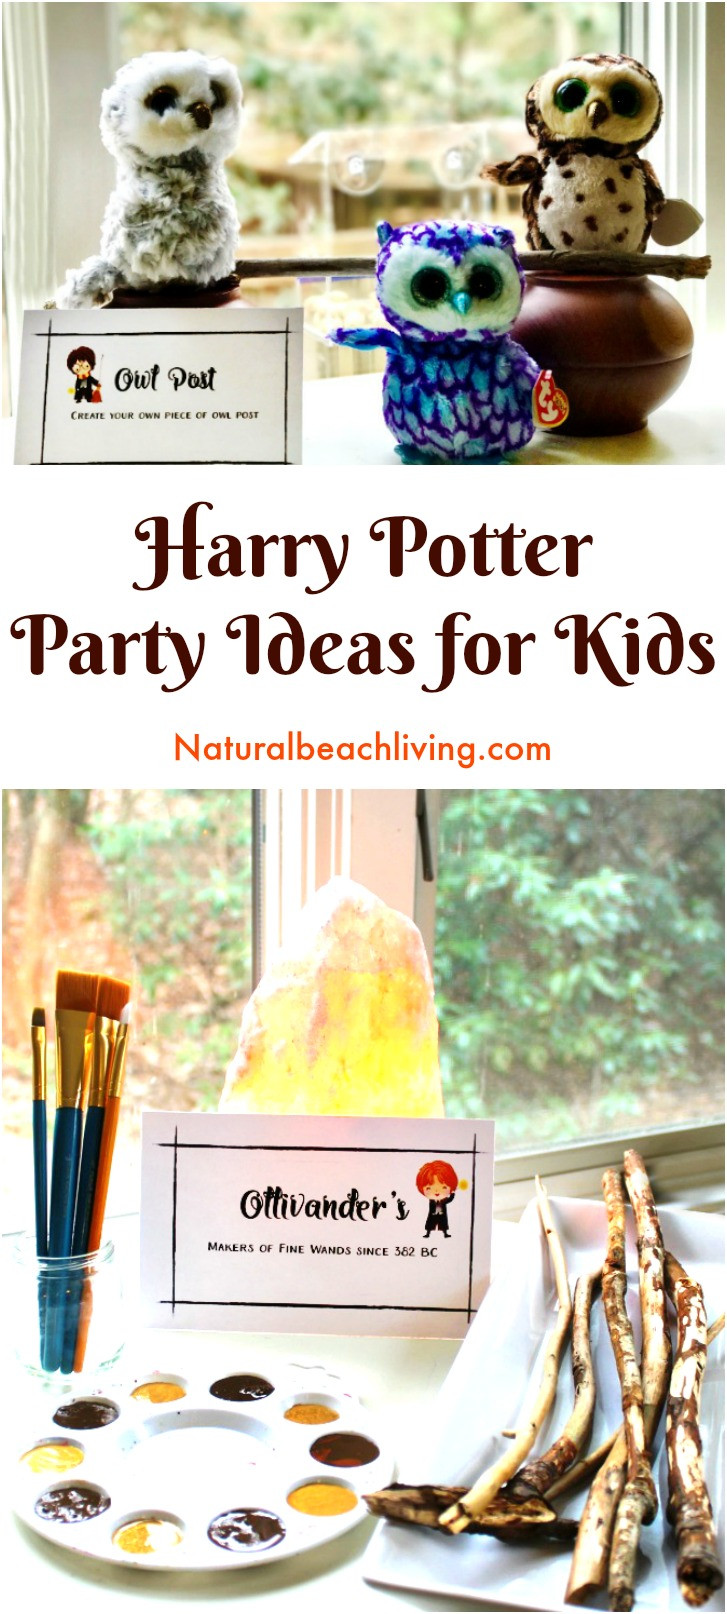 Harry Potter Birthday Party
 The Best Harry Potter Party Ideas and Printables for Kids